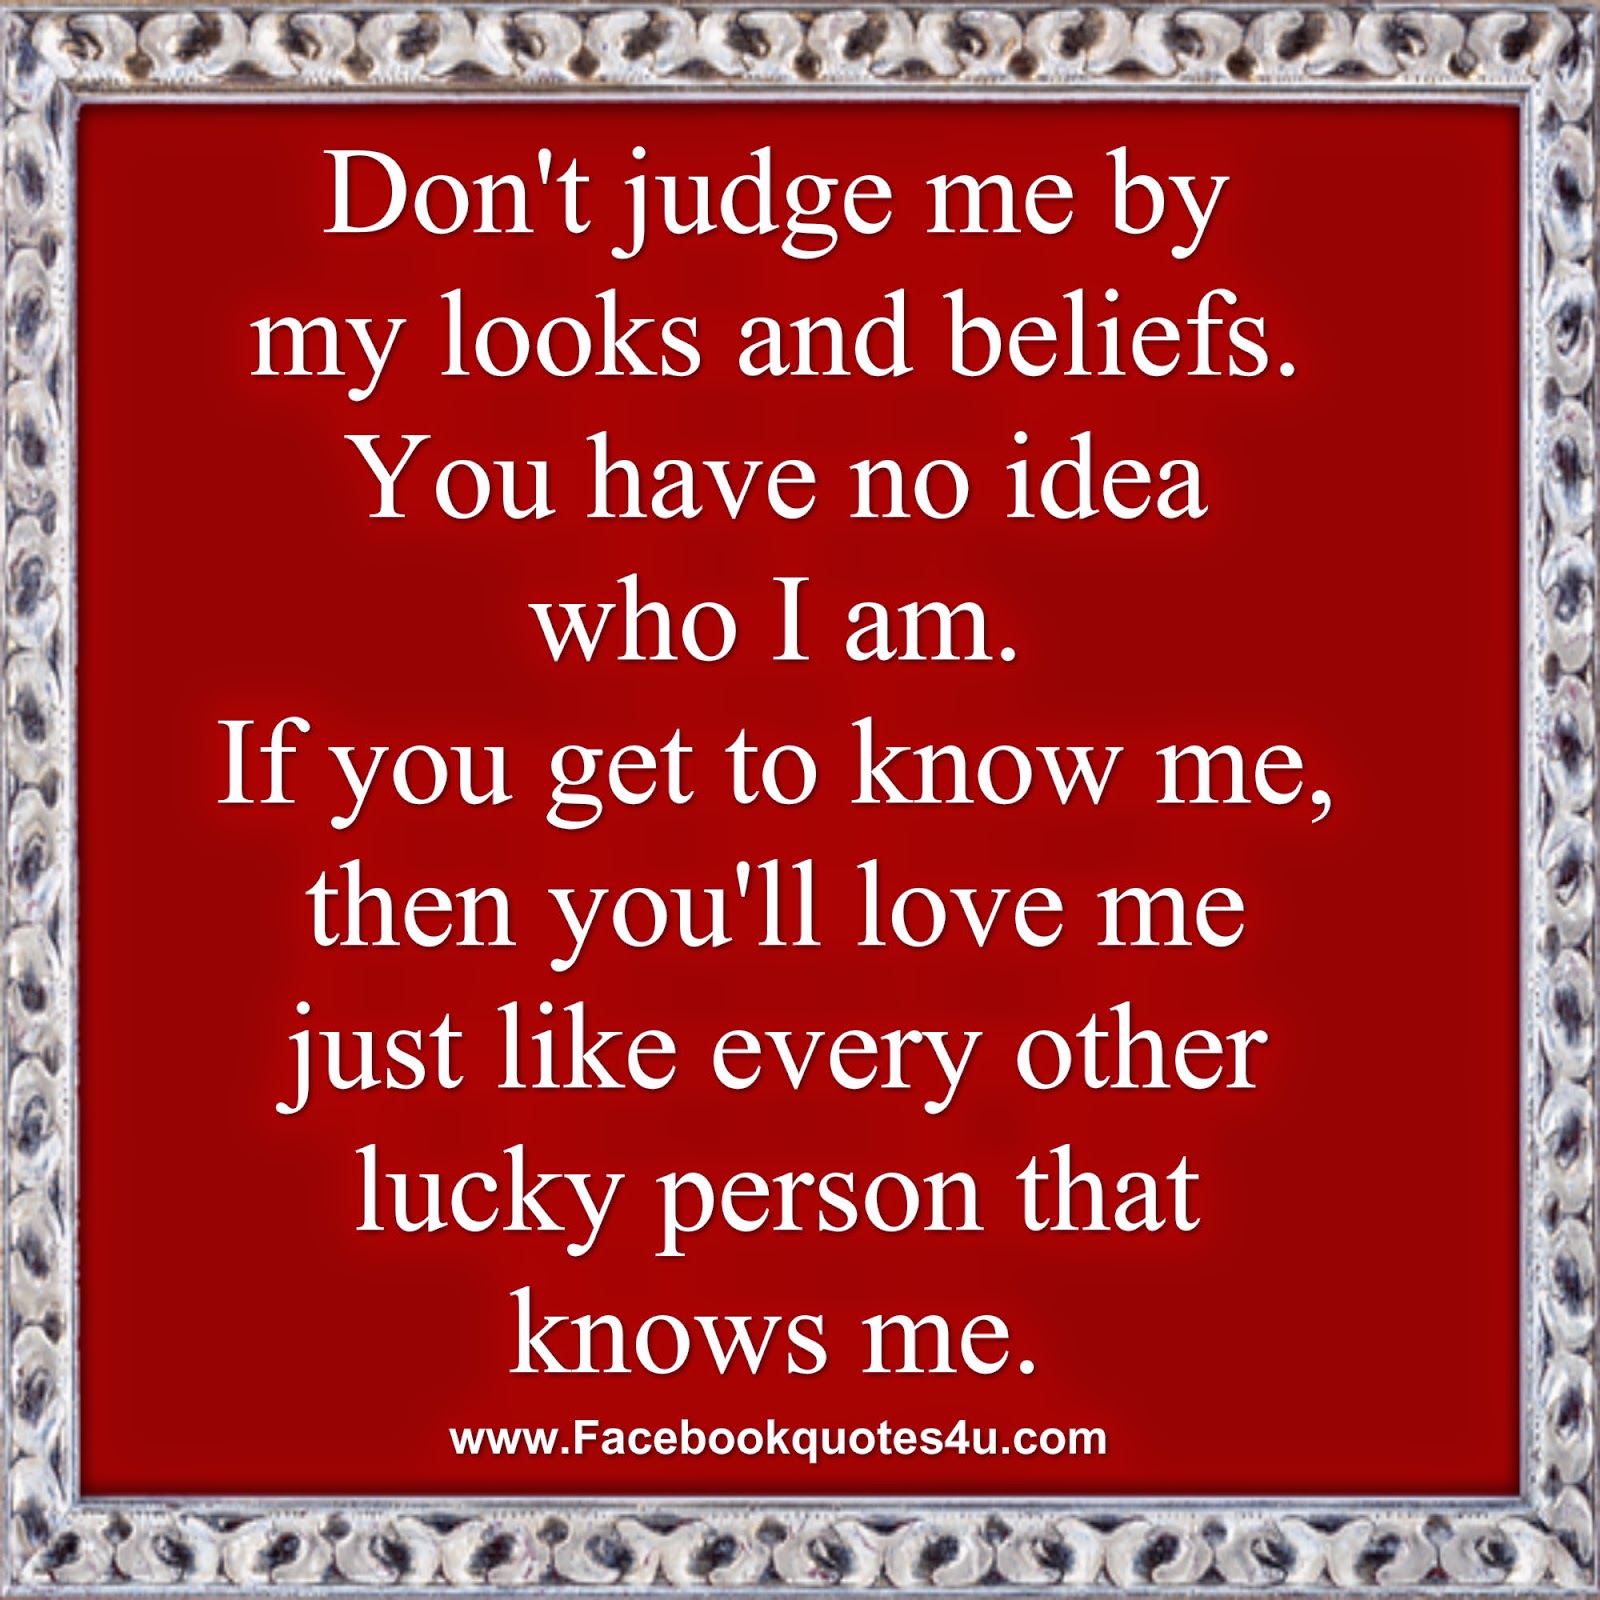 Don t judge me by my looks and beliefs